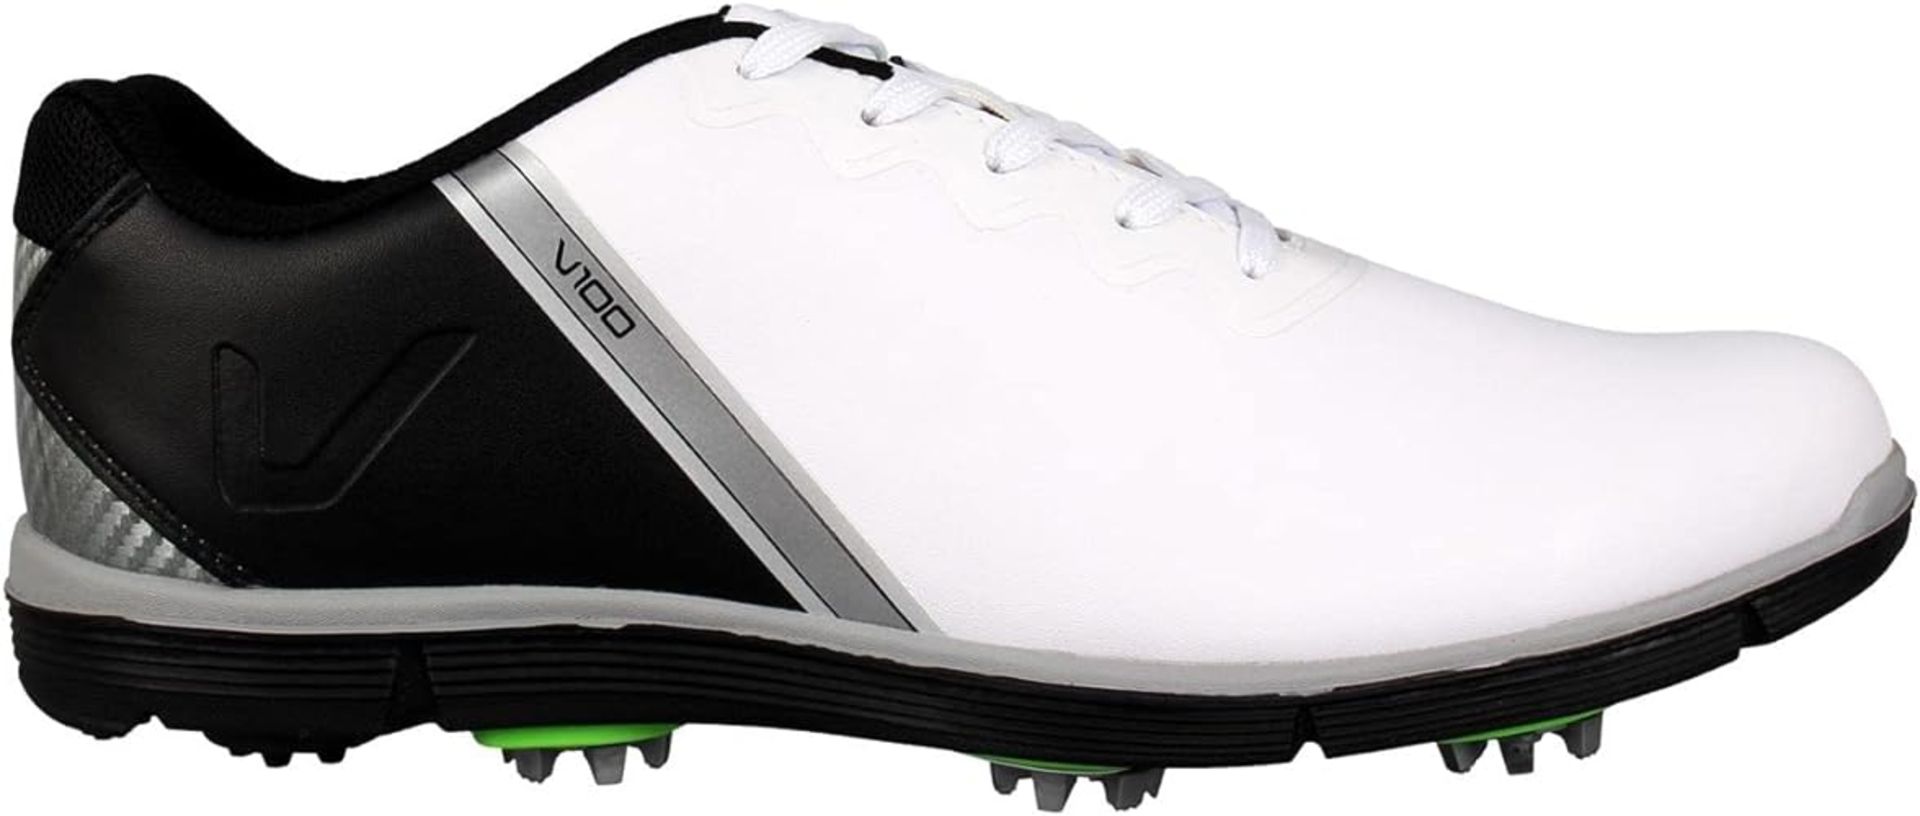 2 X BRAND NEW PAIRS OF SLAZENGER V100 PROFESSIONAL GOLF SHOES SIZE 11 RRP £89 EACH S1RA